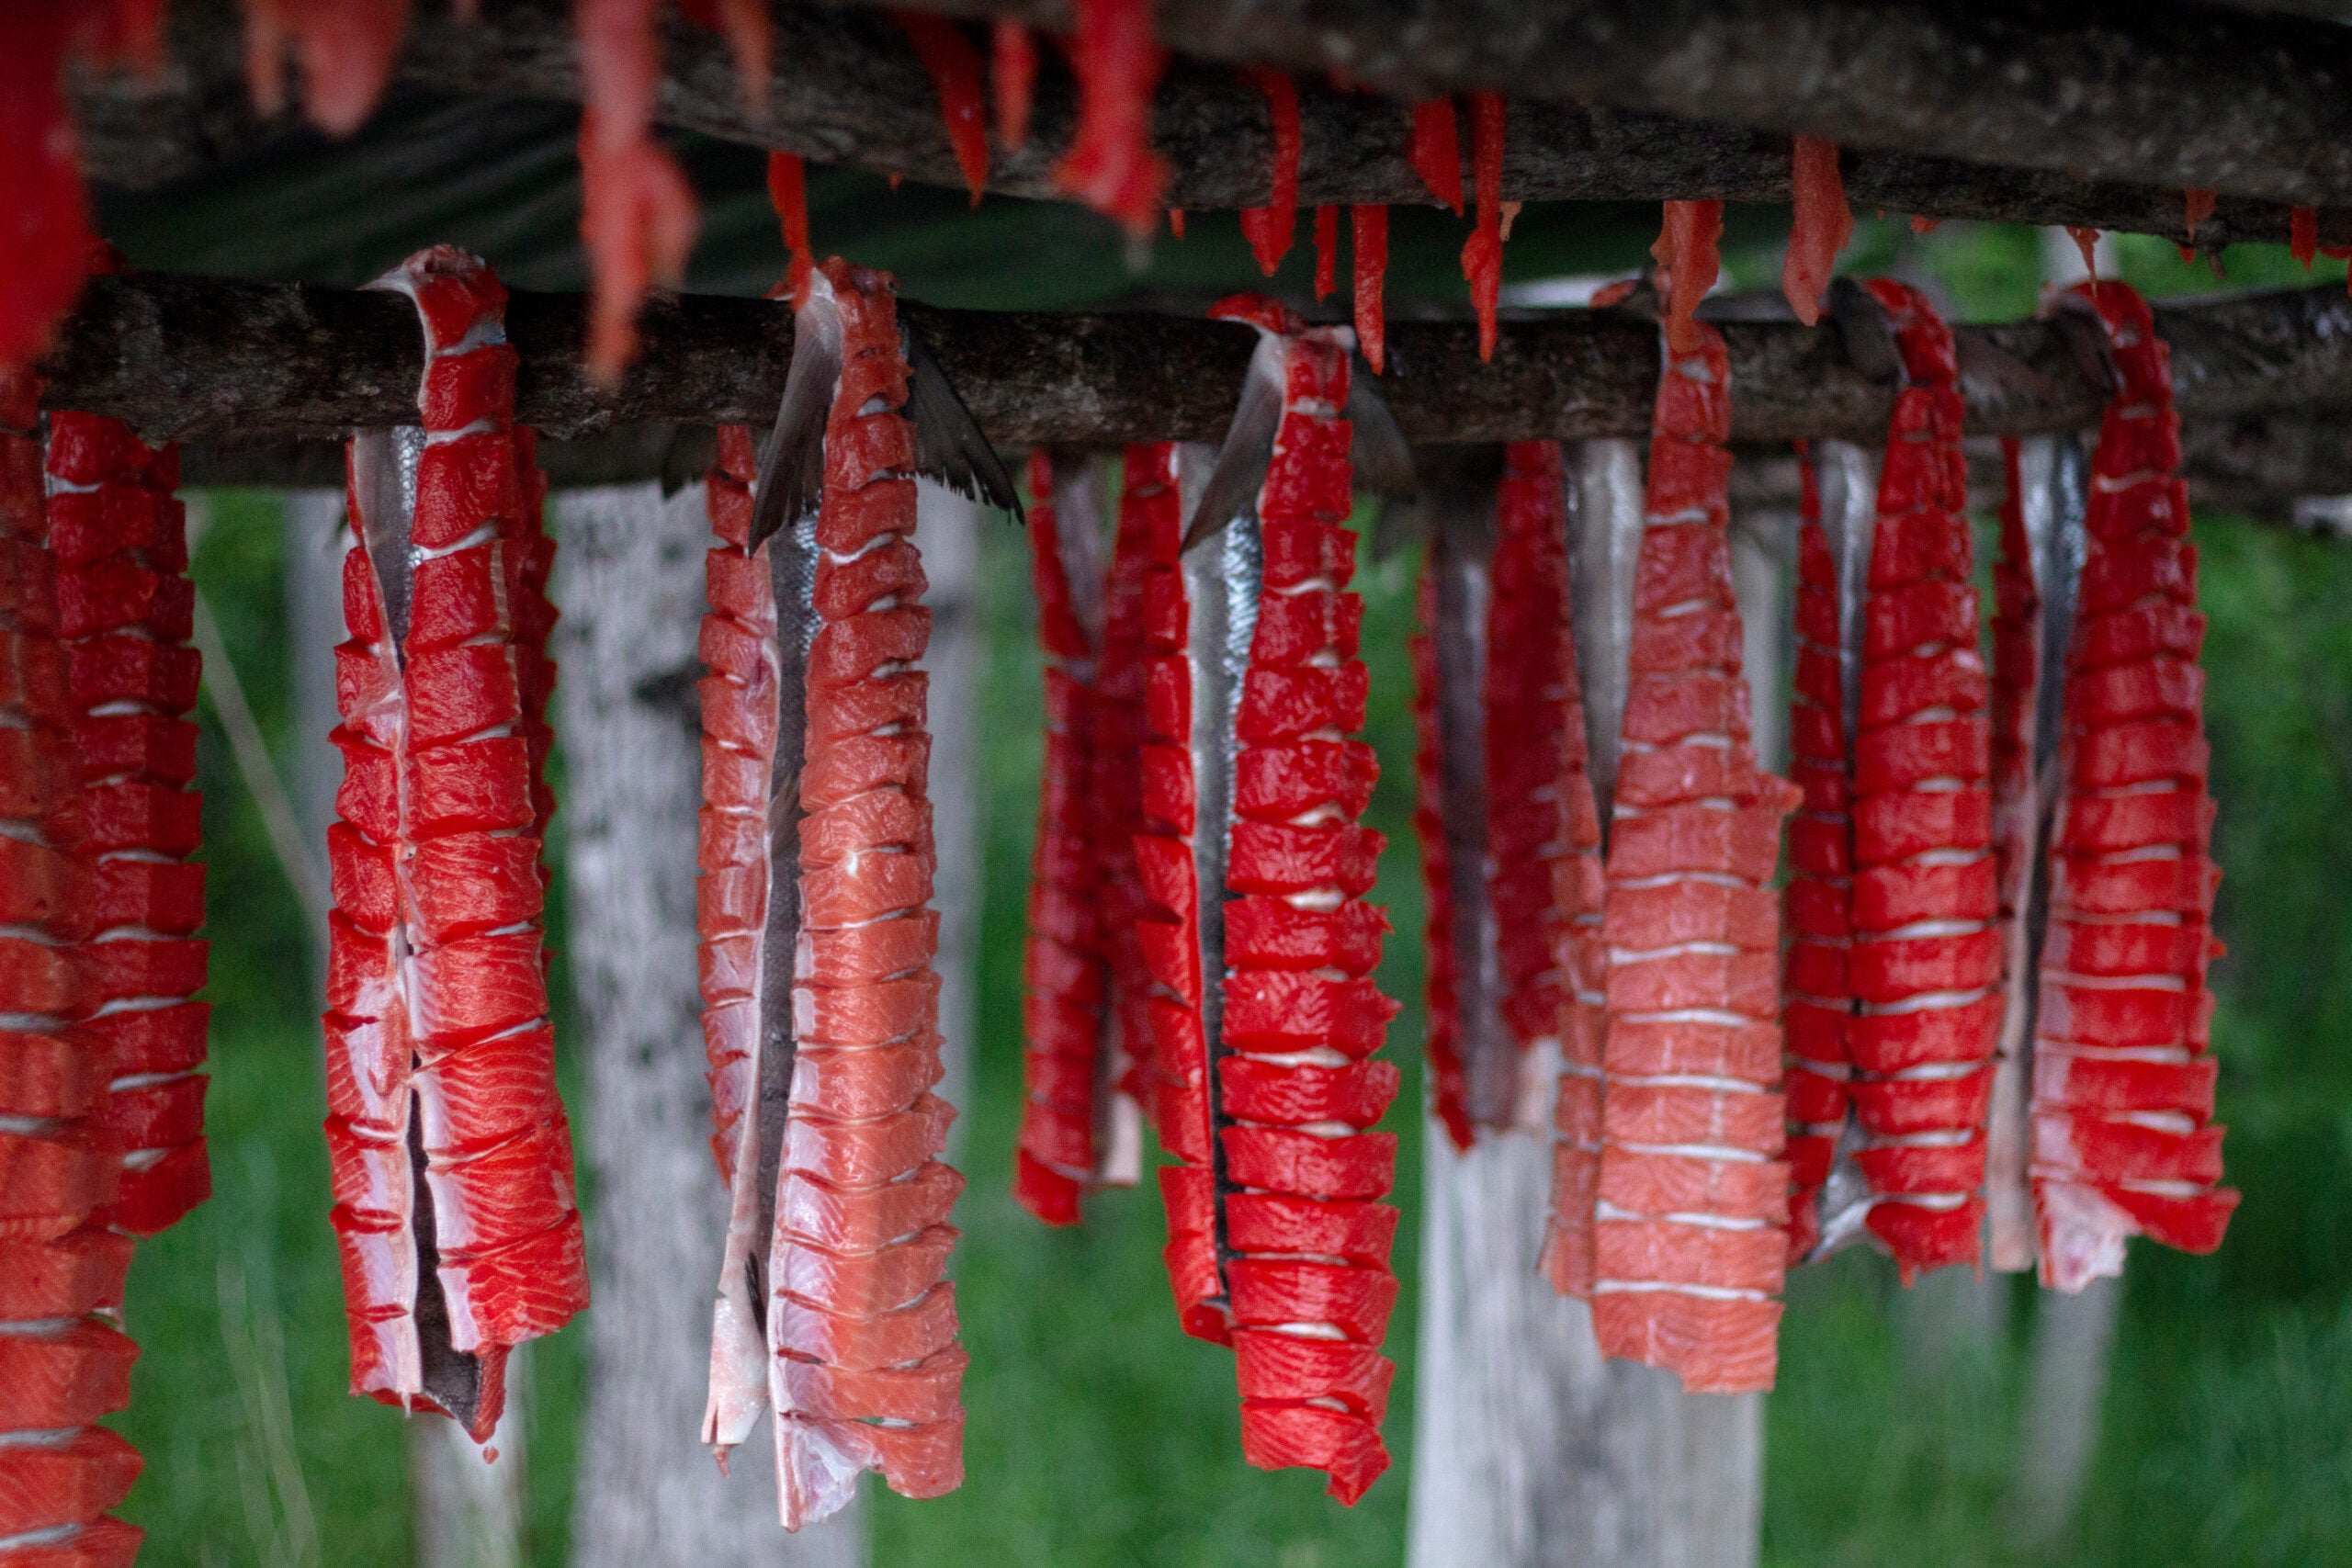 Salmon hang in the Kuskokwim. In the Delta, salmon are caught, prepared by hand, and preserved to feed families throughout the year.